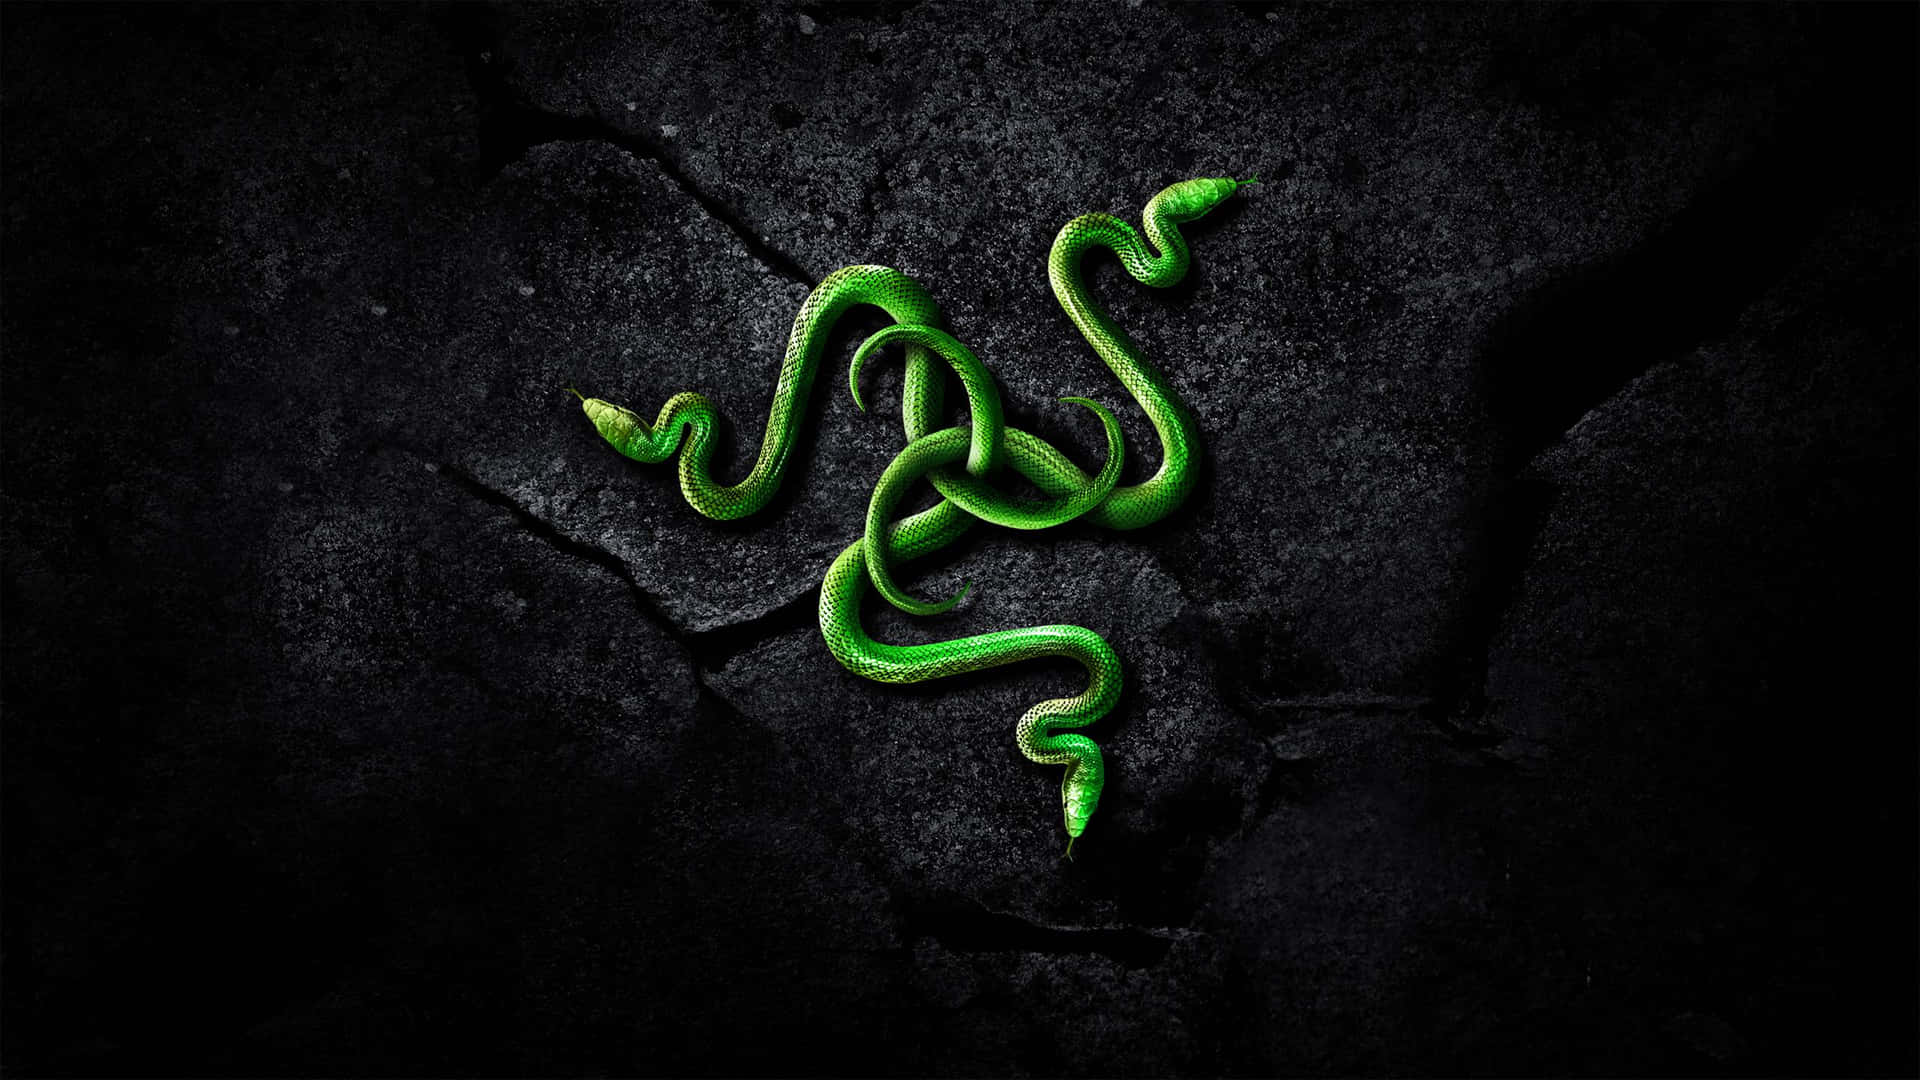 Get your game on with Razer